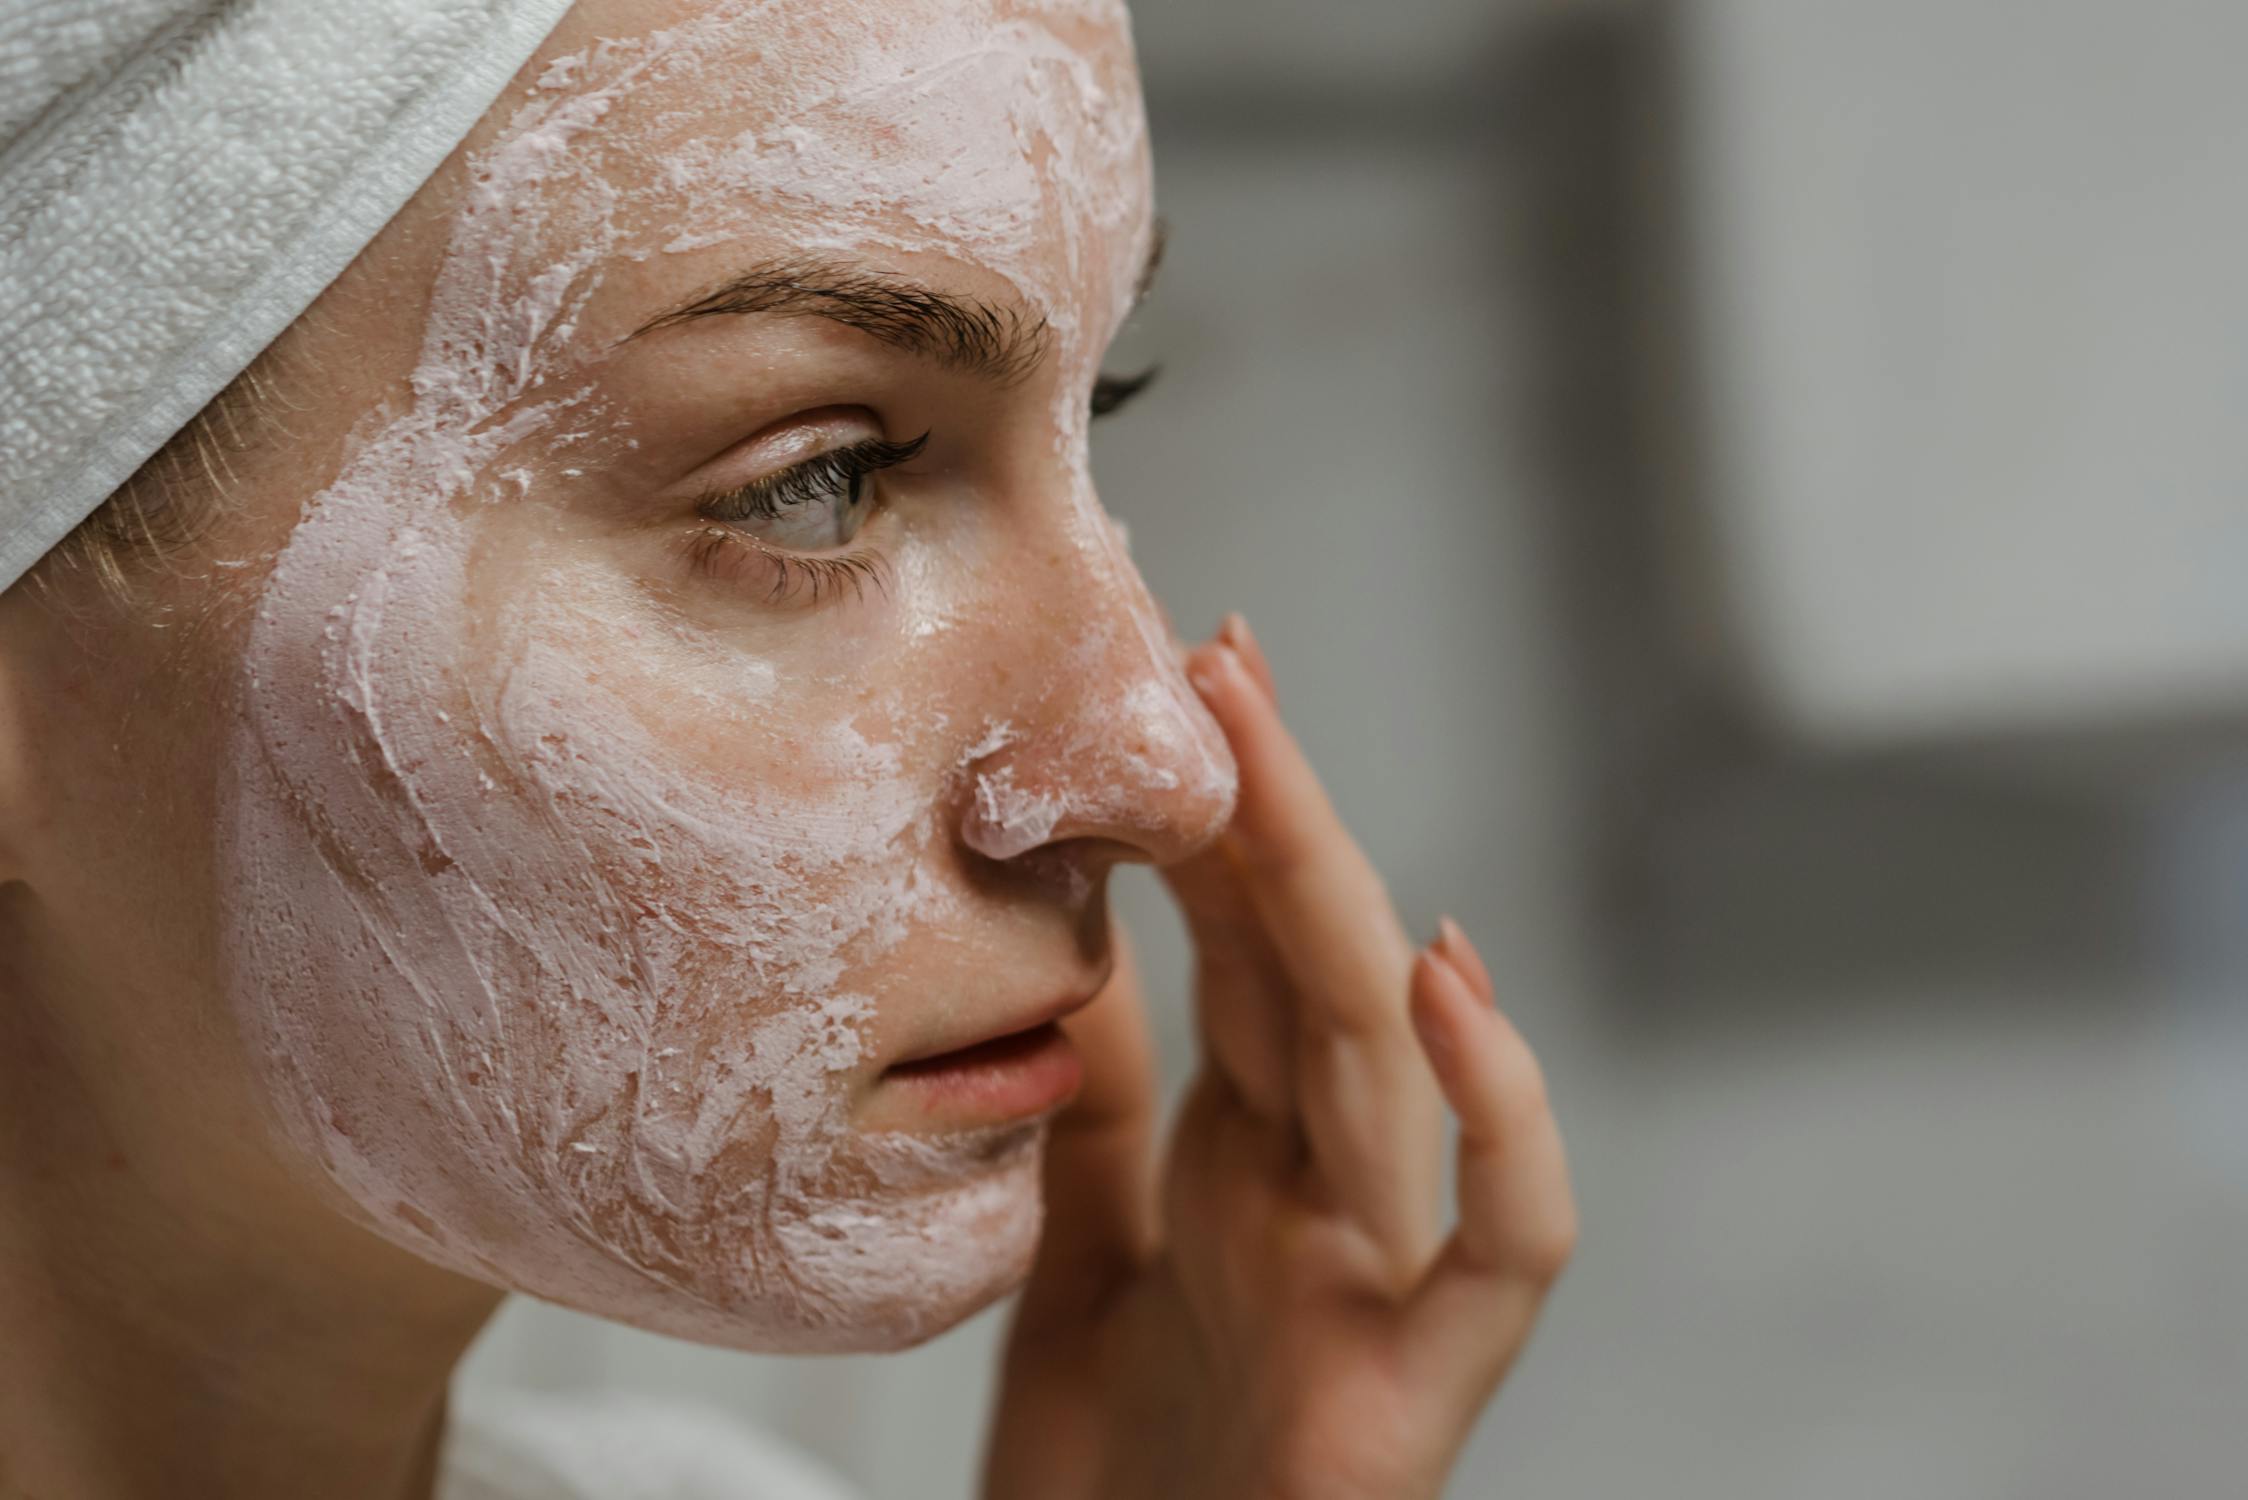 Skin Care Photo by Polina Kovaleva from Pexels: https://www.pexels.com/photo/close-up-photo-of-a-woman-applying-facial-cream-5927811/